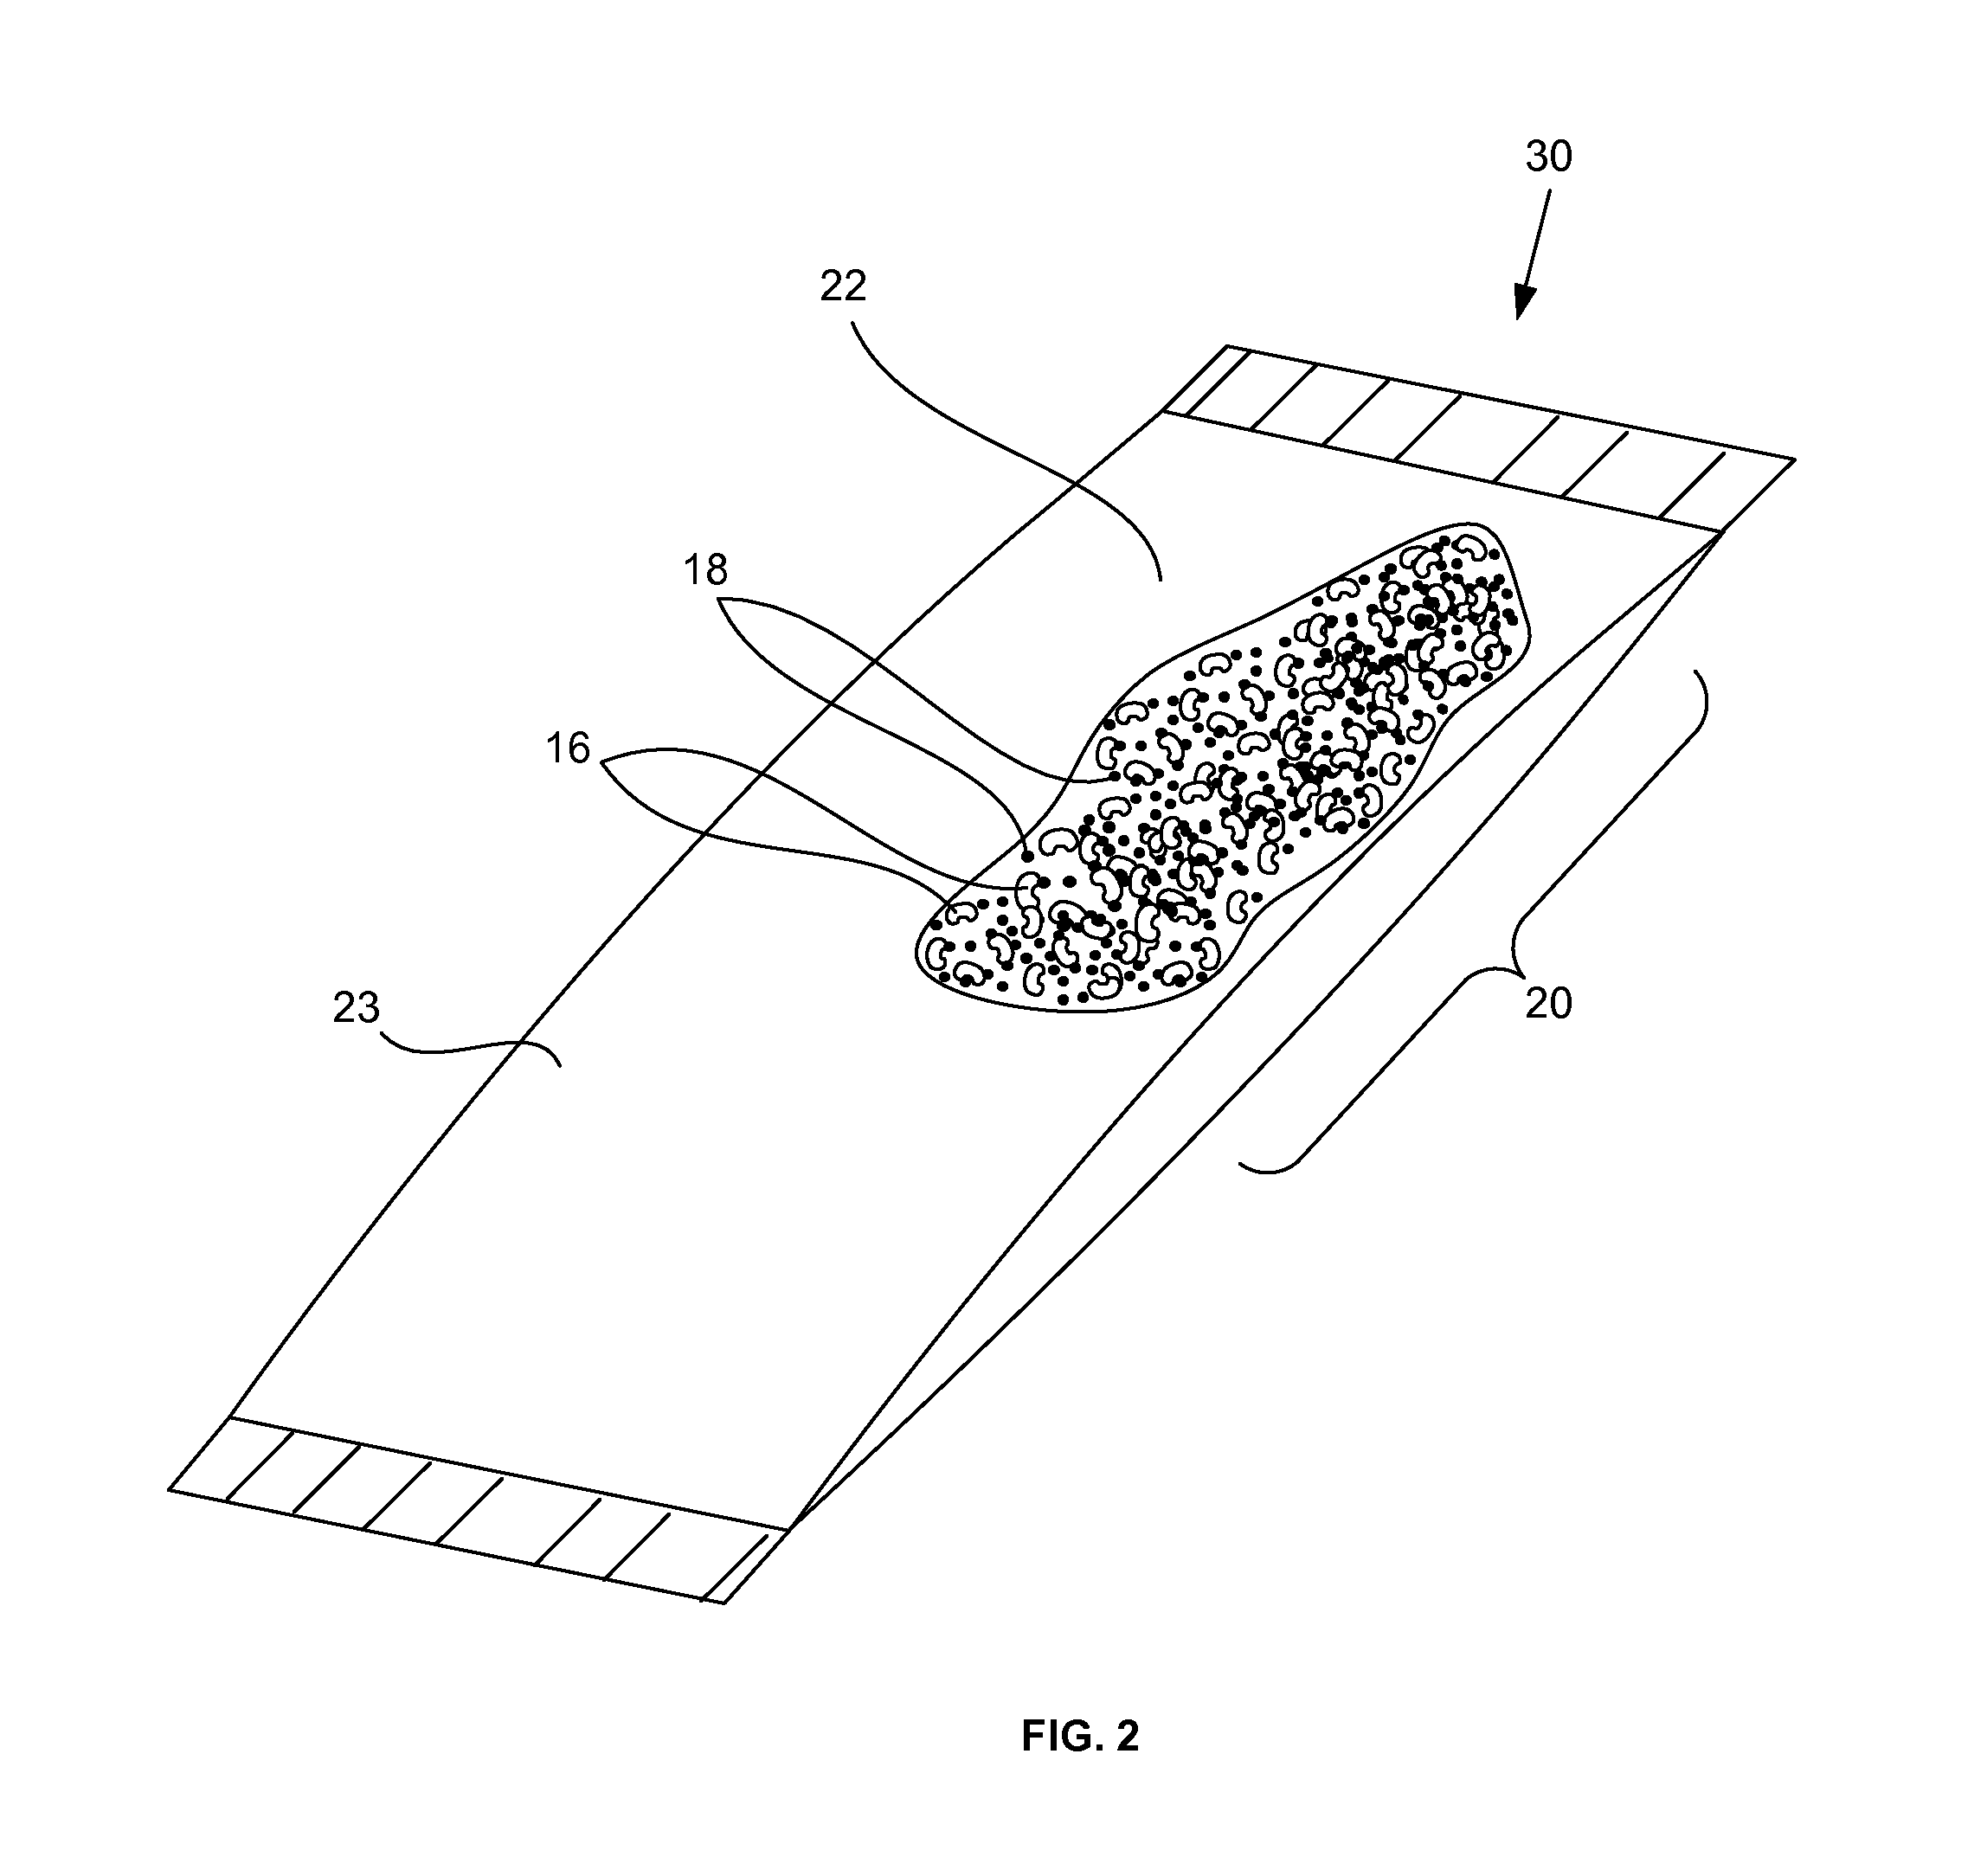 System for solidification of liquid medical waste